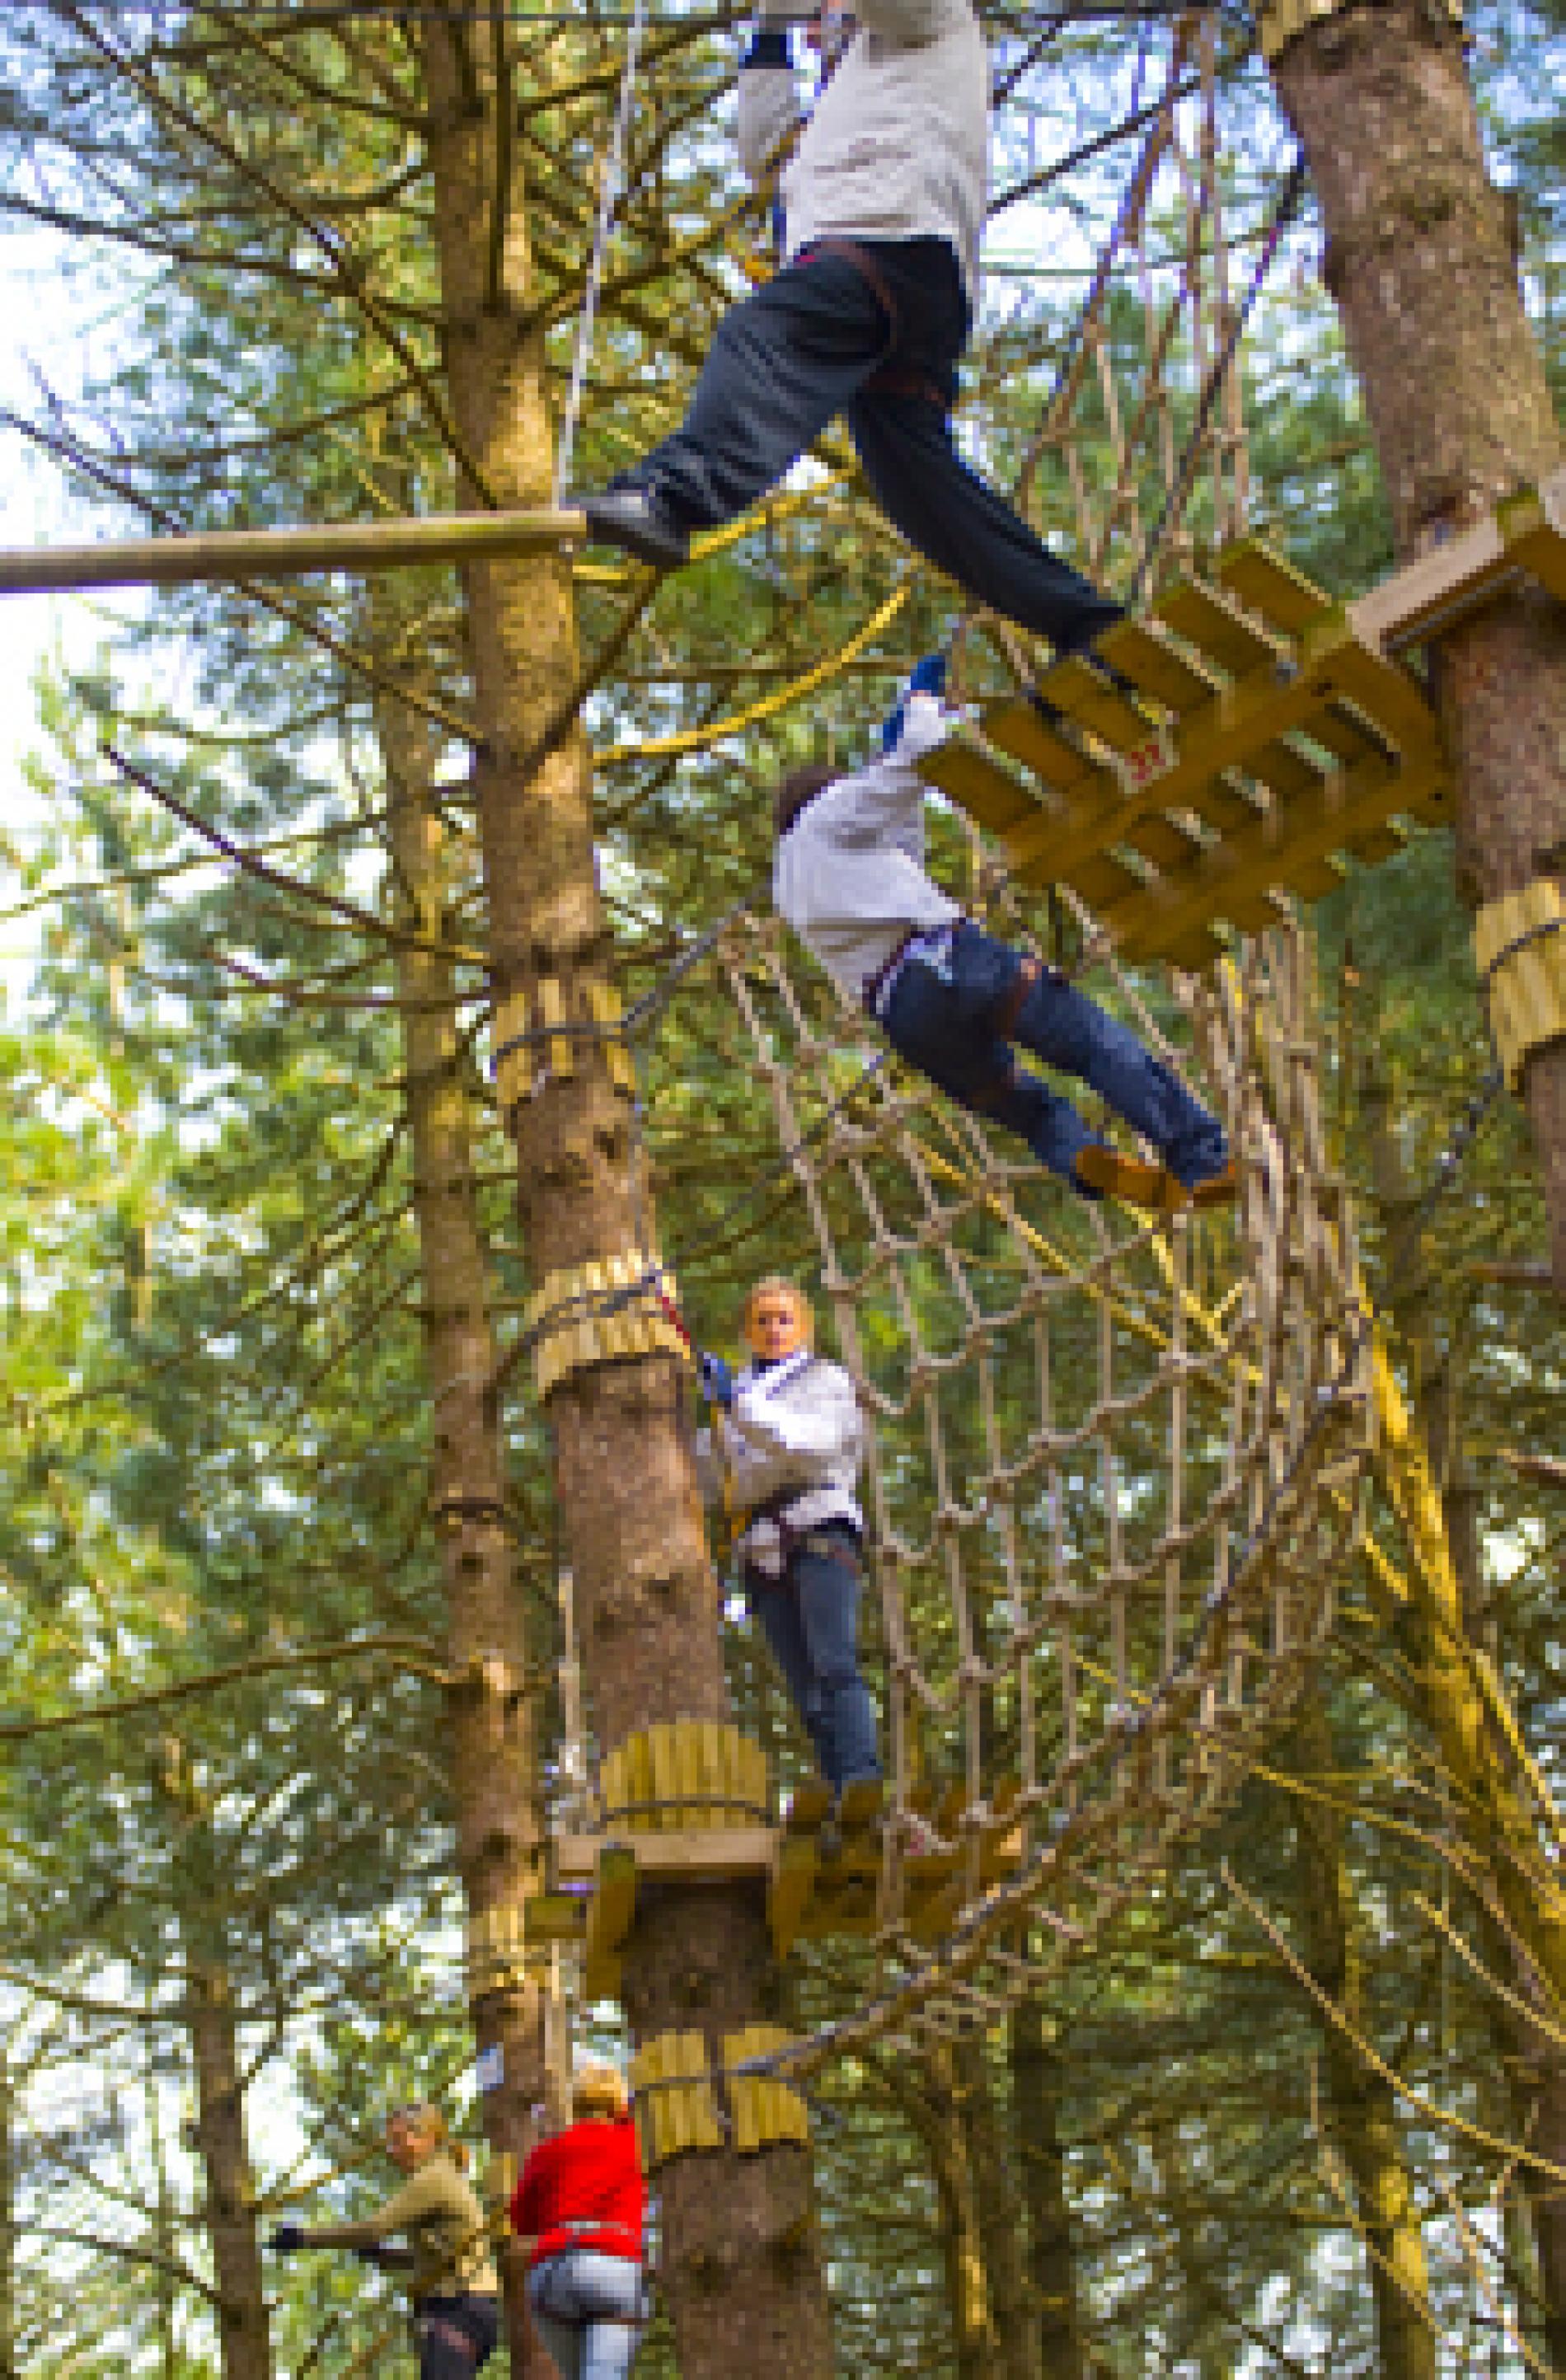 ADVENTURE PARK AND ACCROBRANCHE